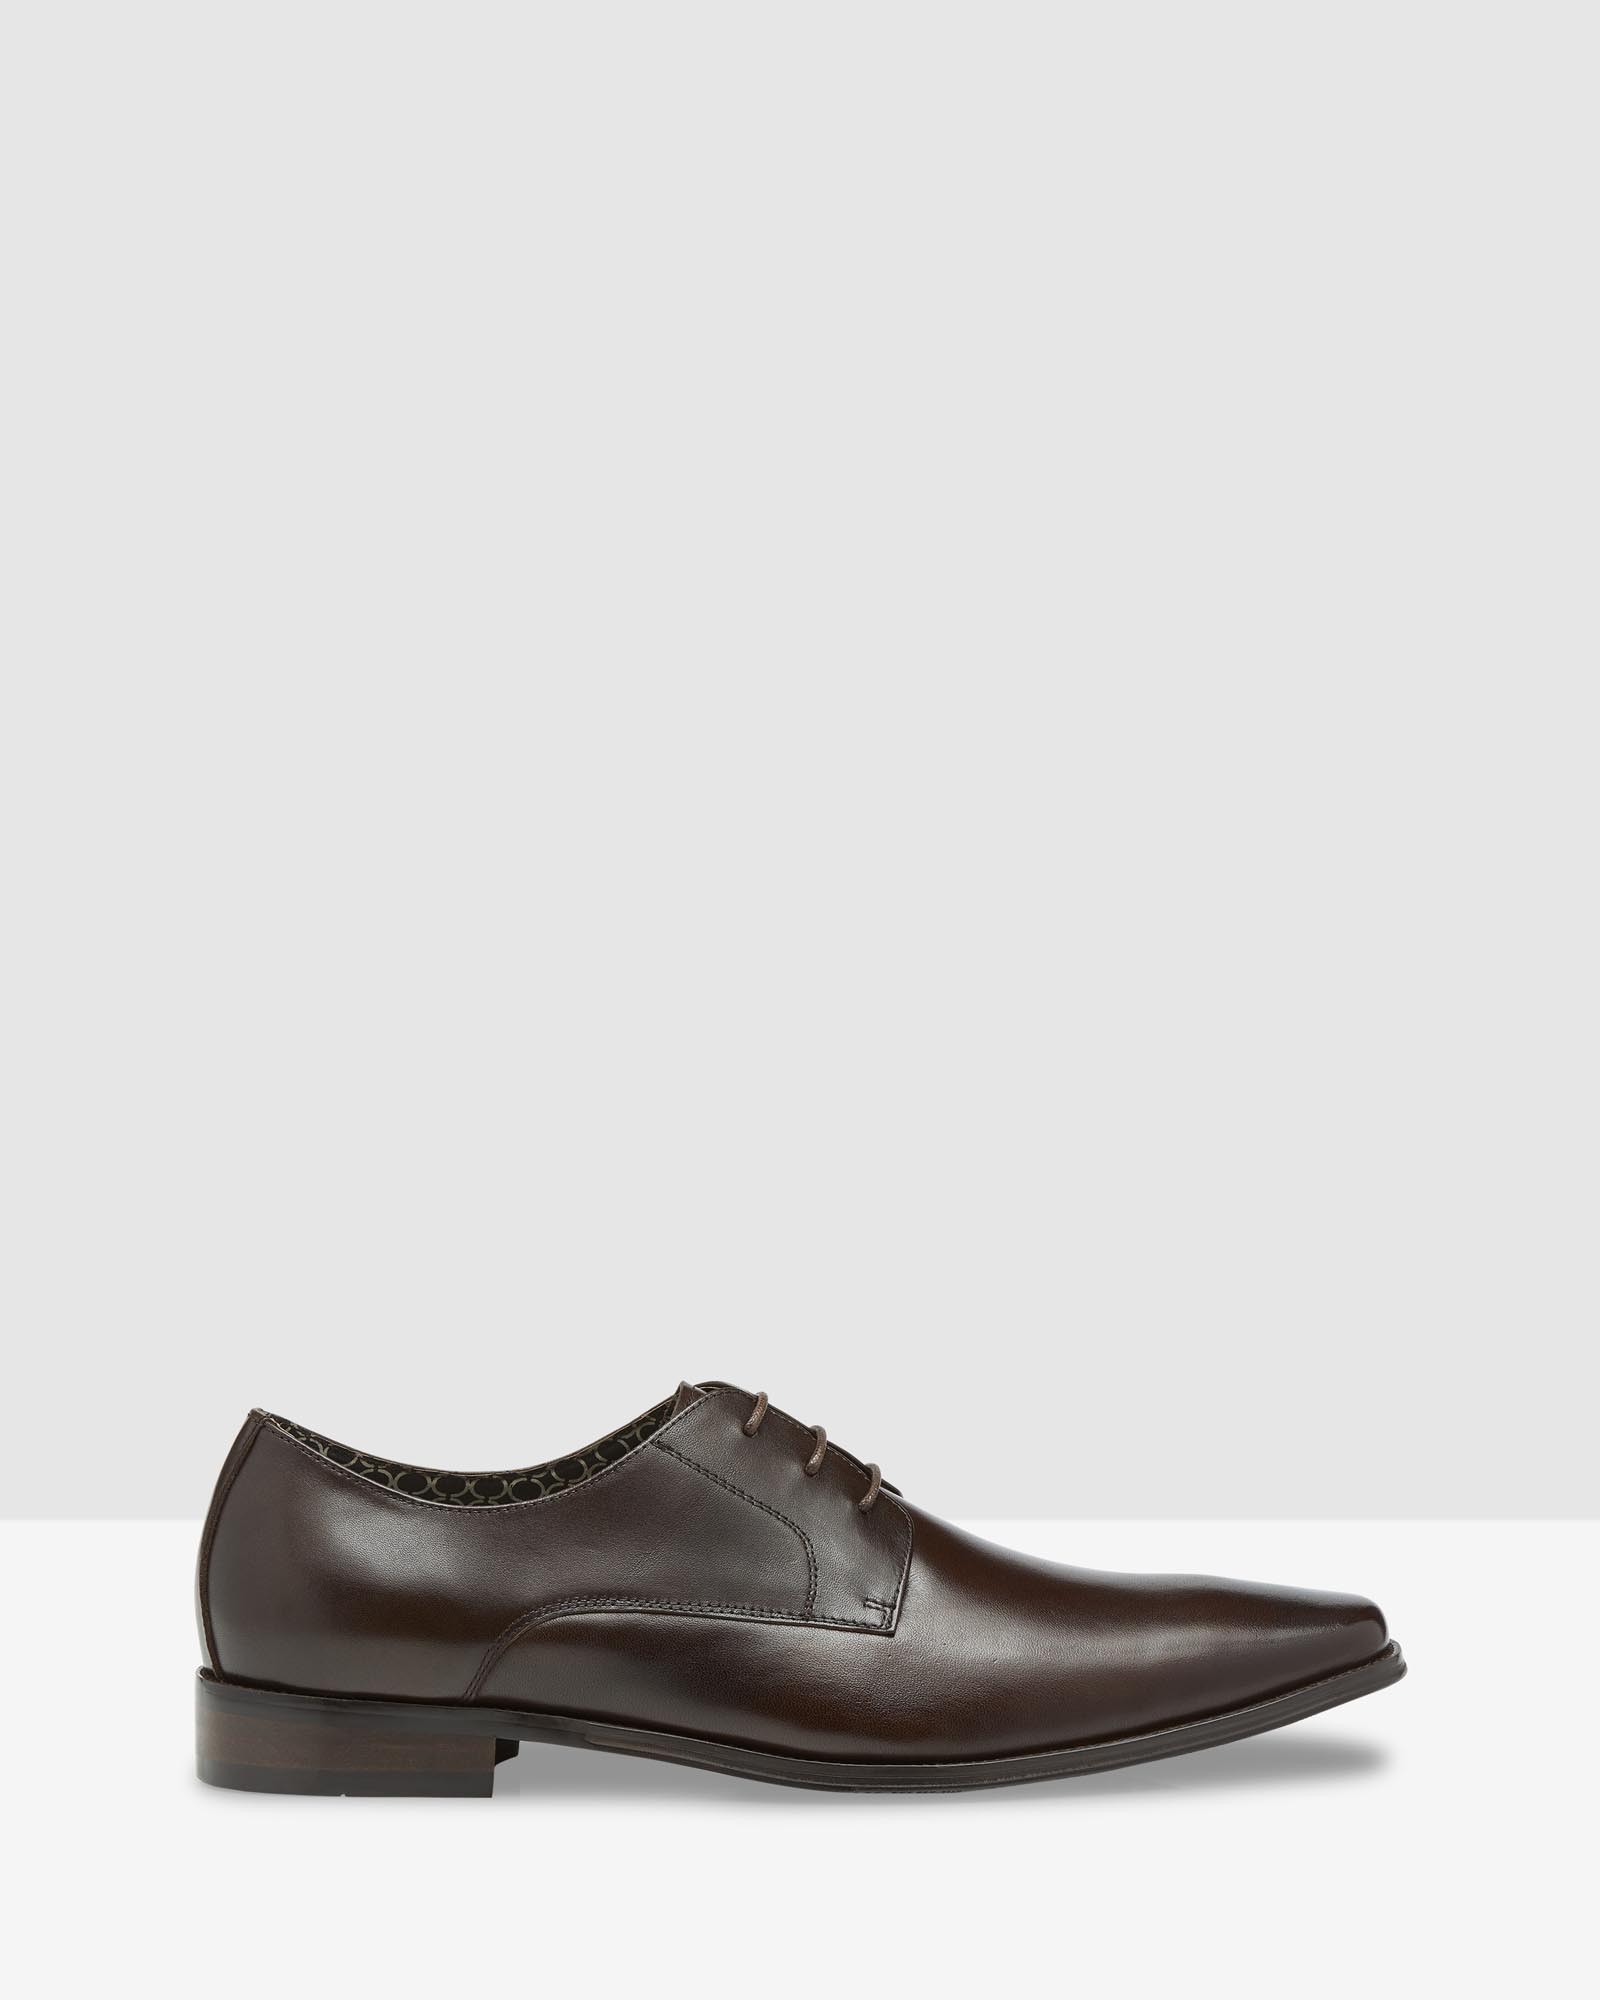 Aiden Darby Shoes Dark Brown by Oxford | ShoeSales